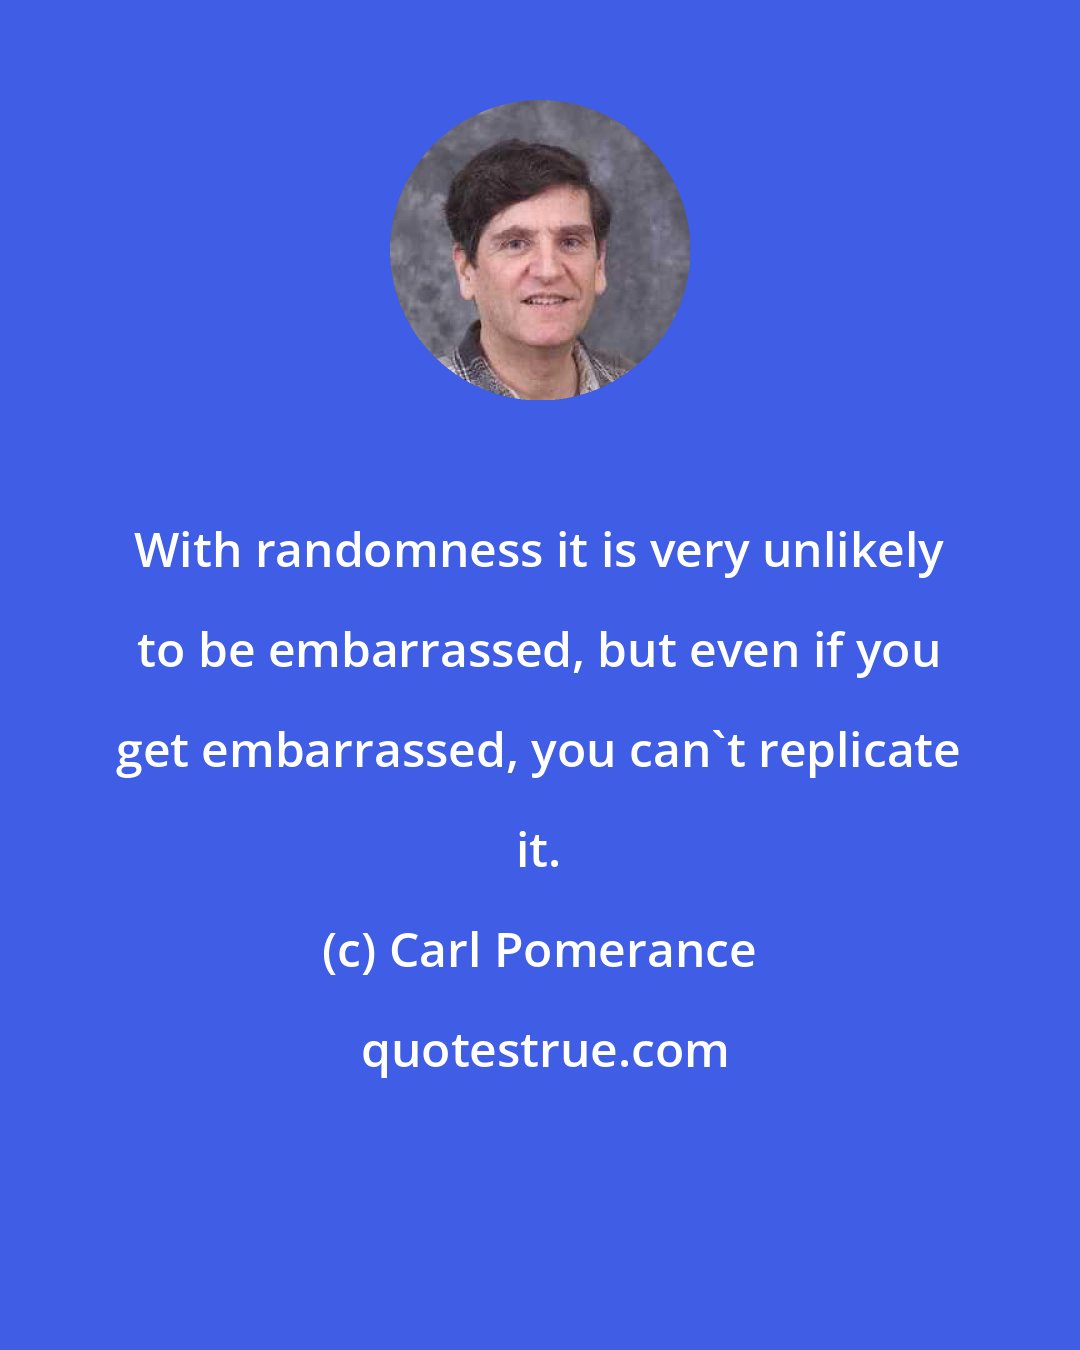 Carl Pomerance: With randomness it is very unlikely to be embarrassed, but even if you get embarrassed, you can't replicate it.